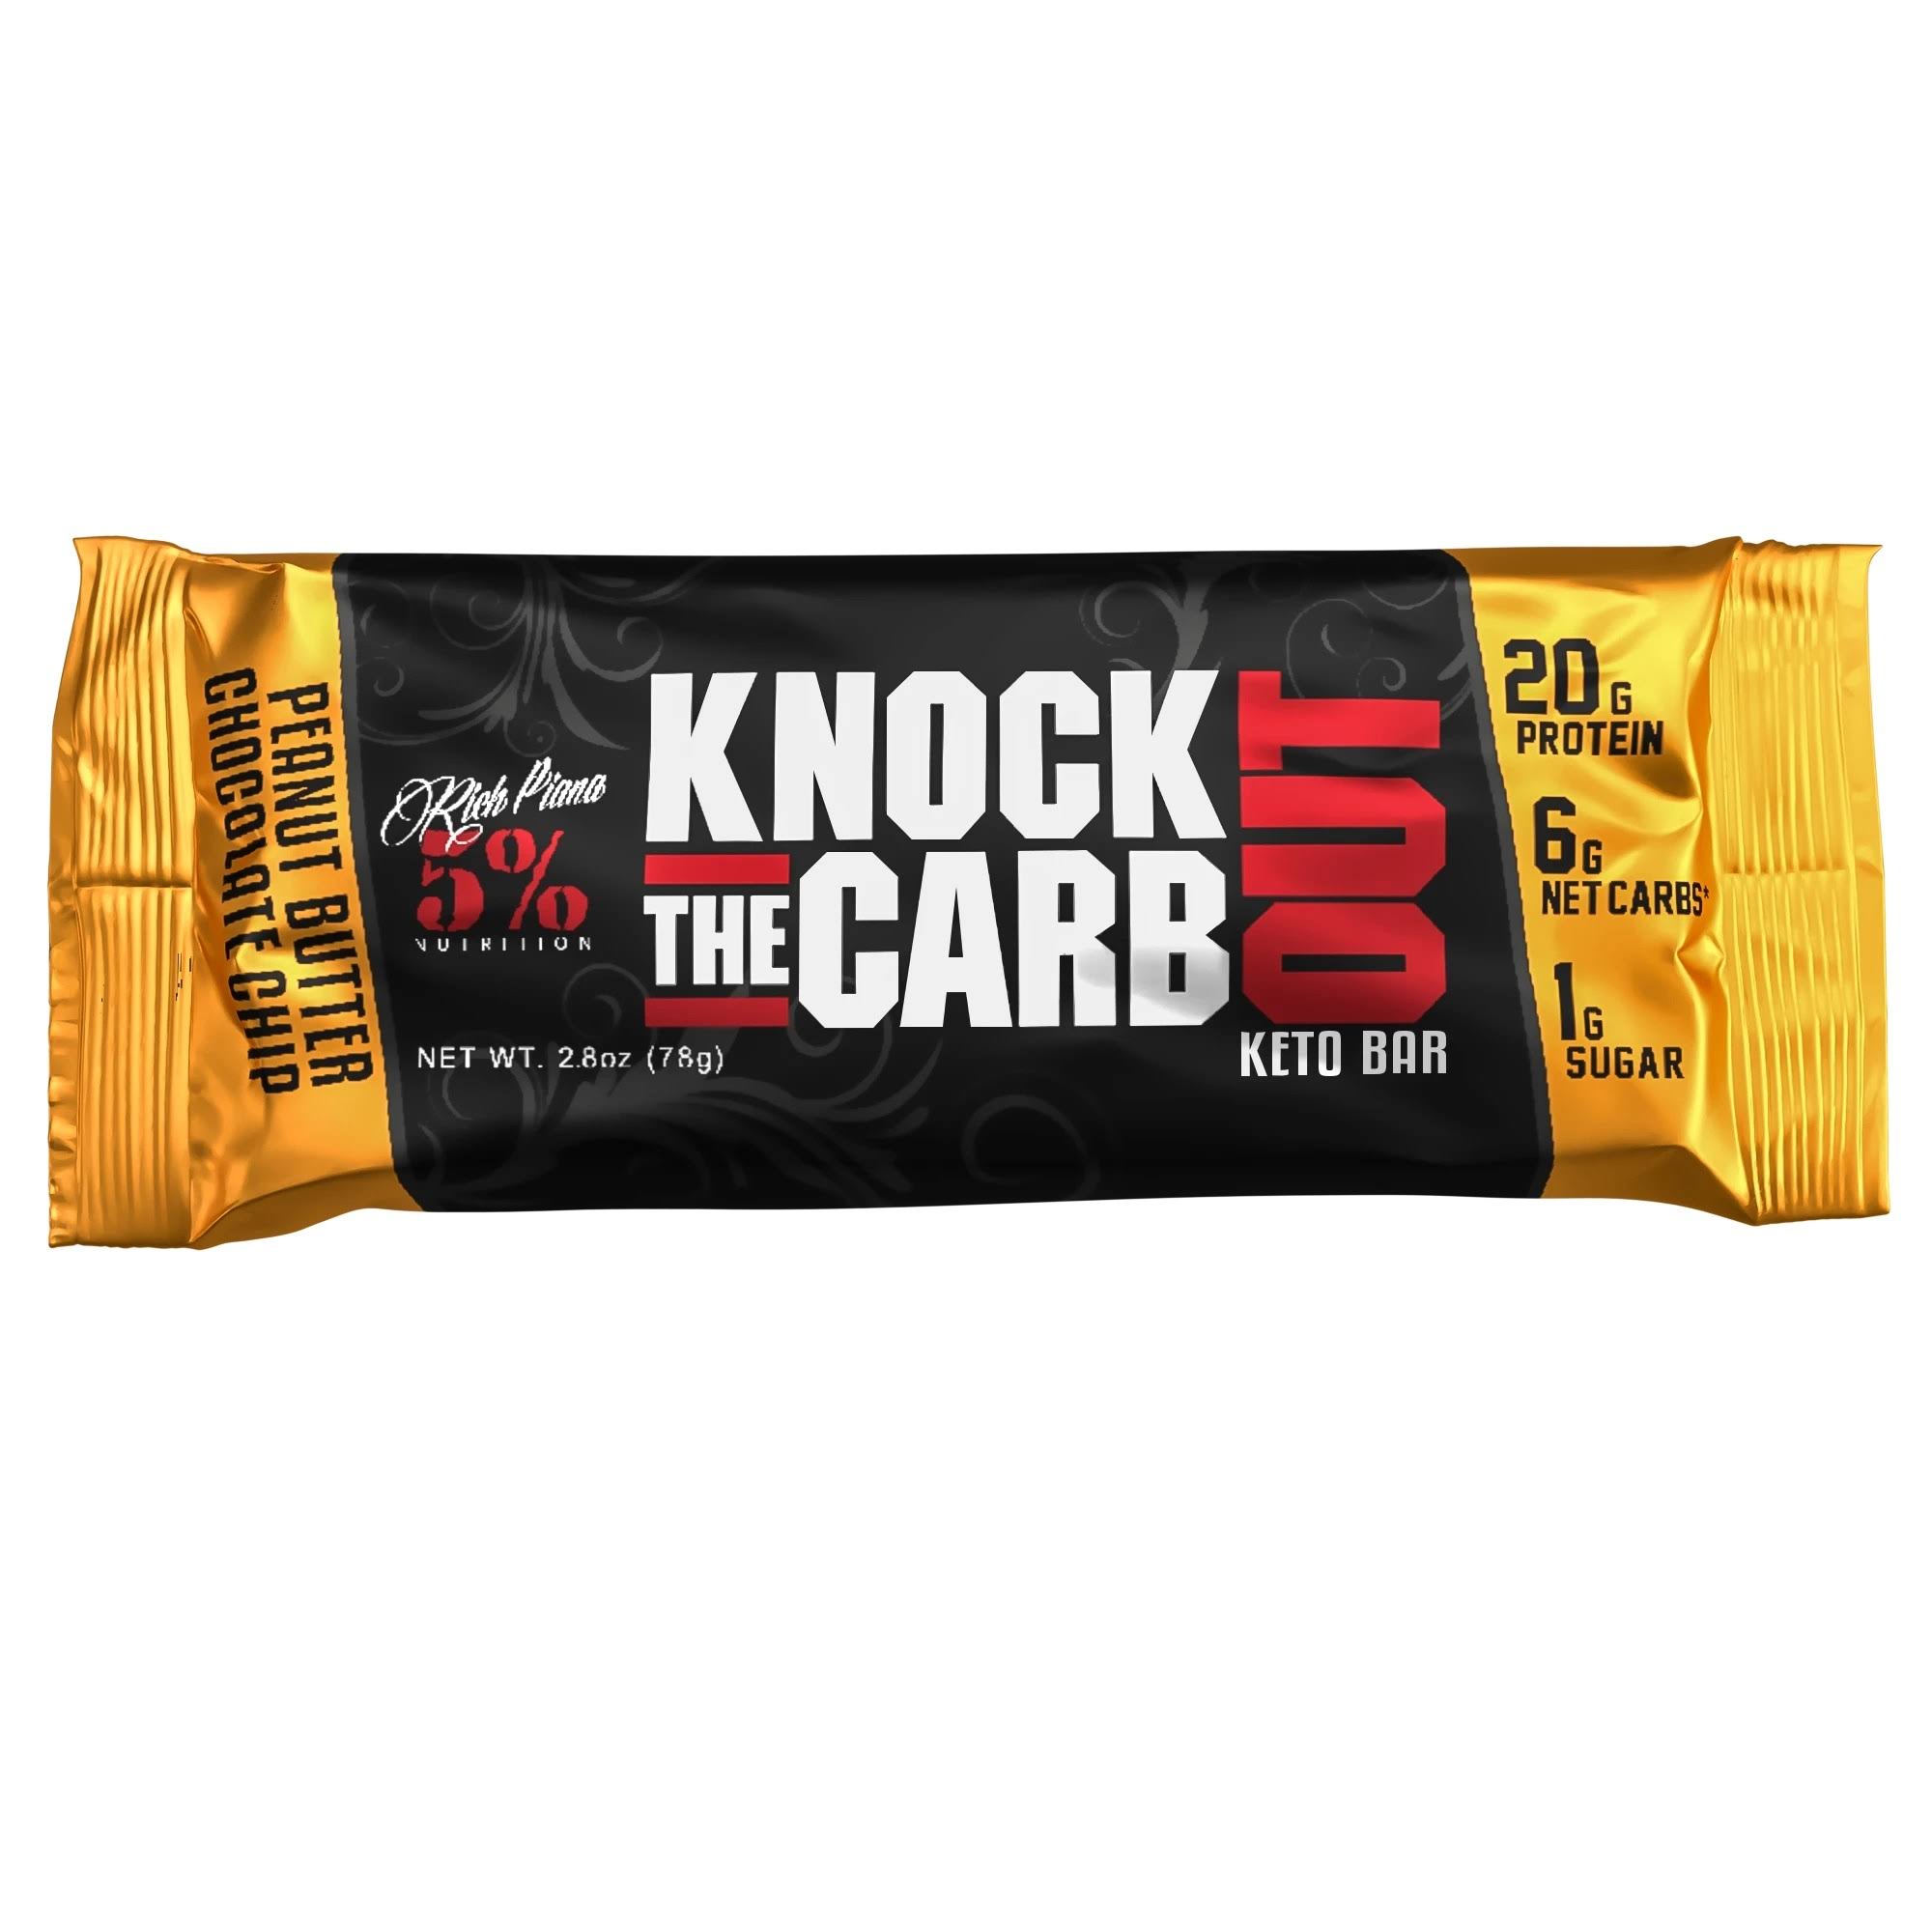 5% Nutrition Knock The Carb Out Peanut Butter Chocolate Chip Keto Bar